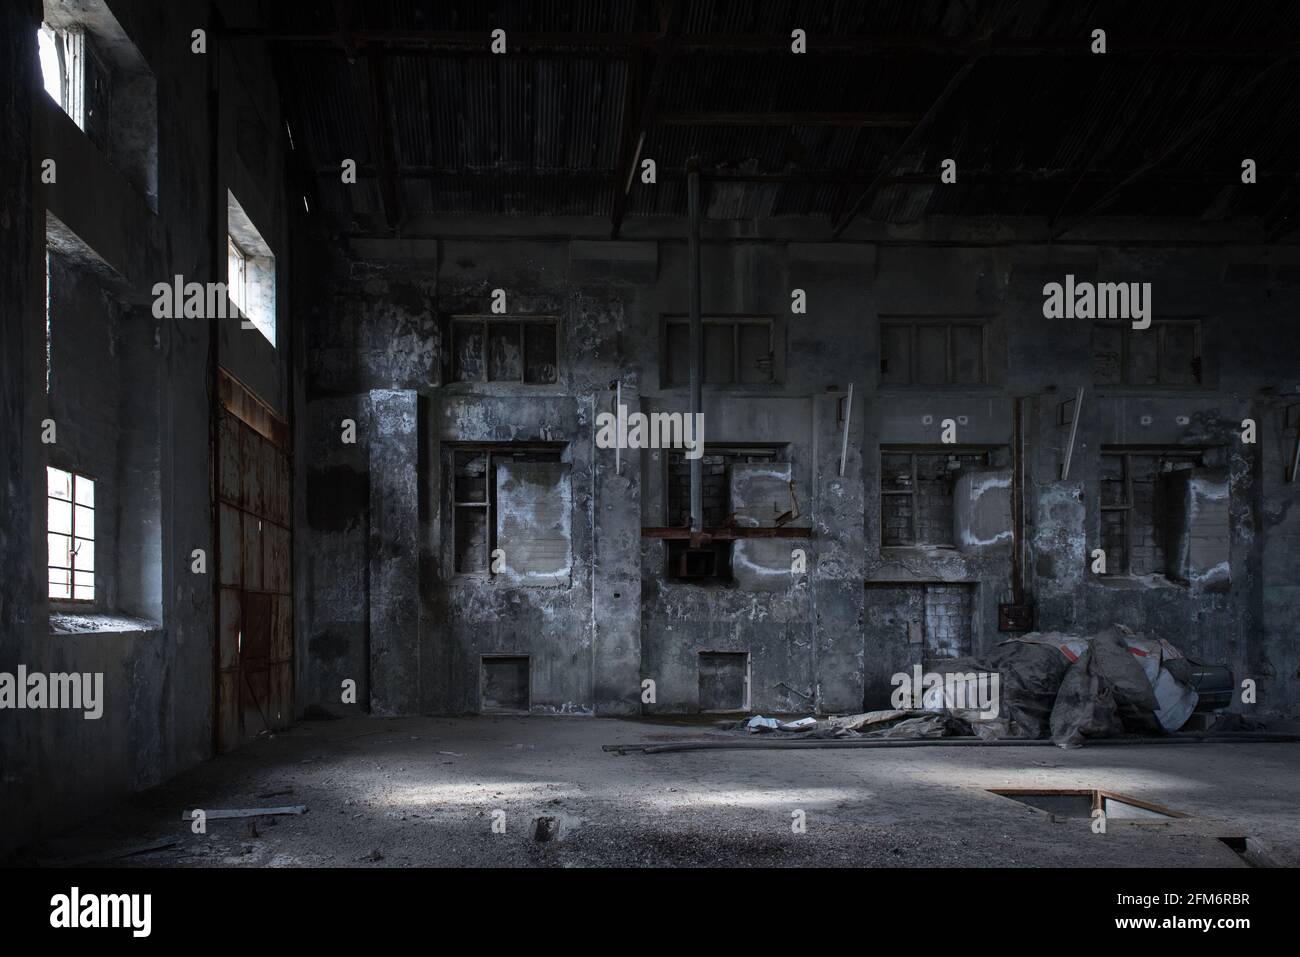 Industrial building backdrop. Interior of abandoned factory with stained concrete walls, bricked windows and pieces of old equipment Stock Photo